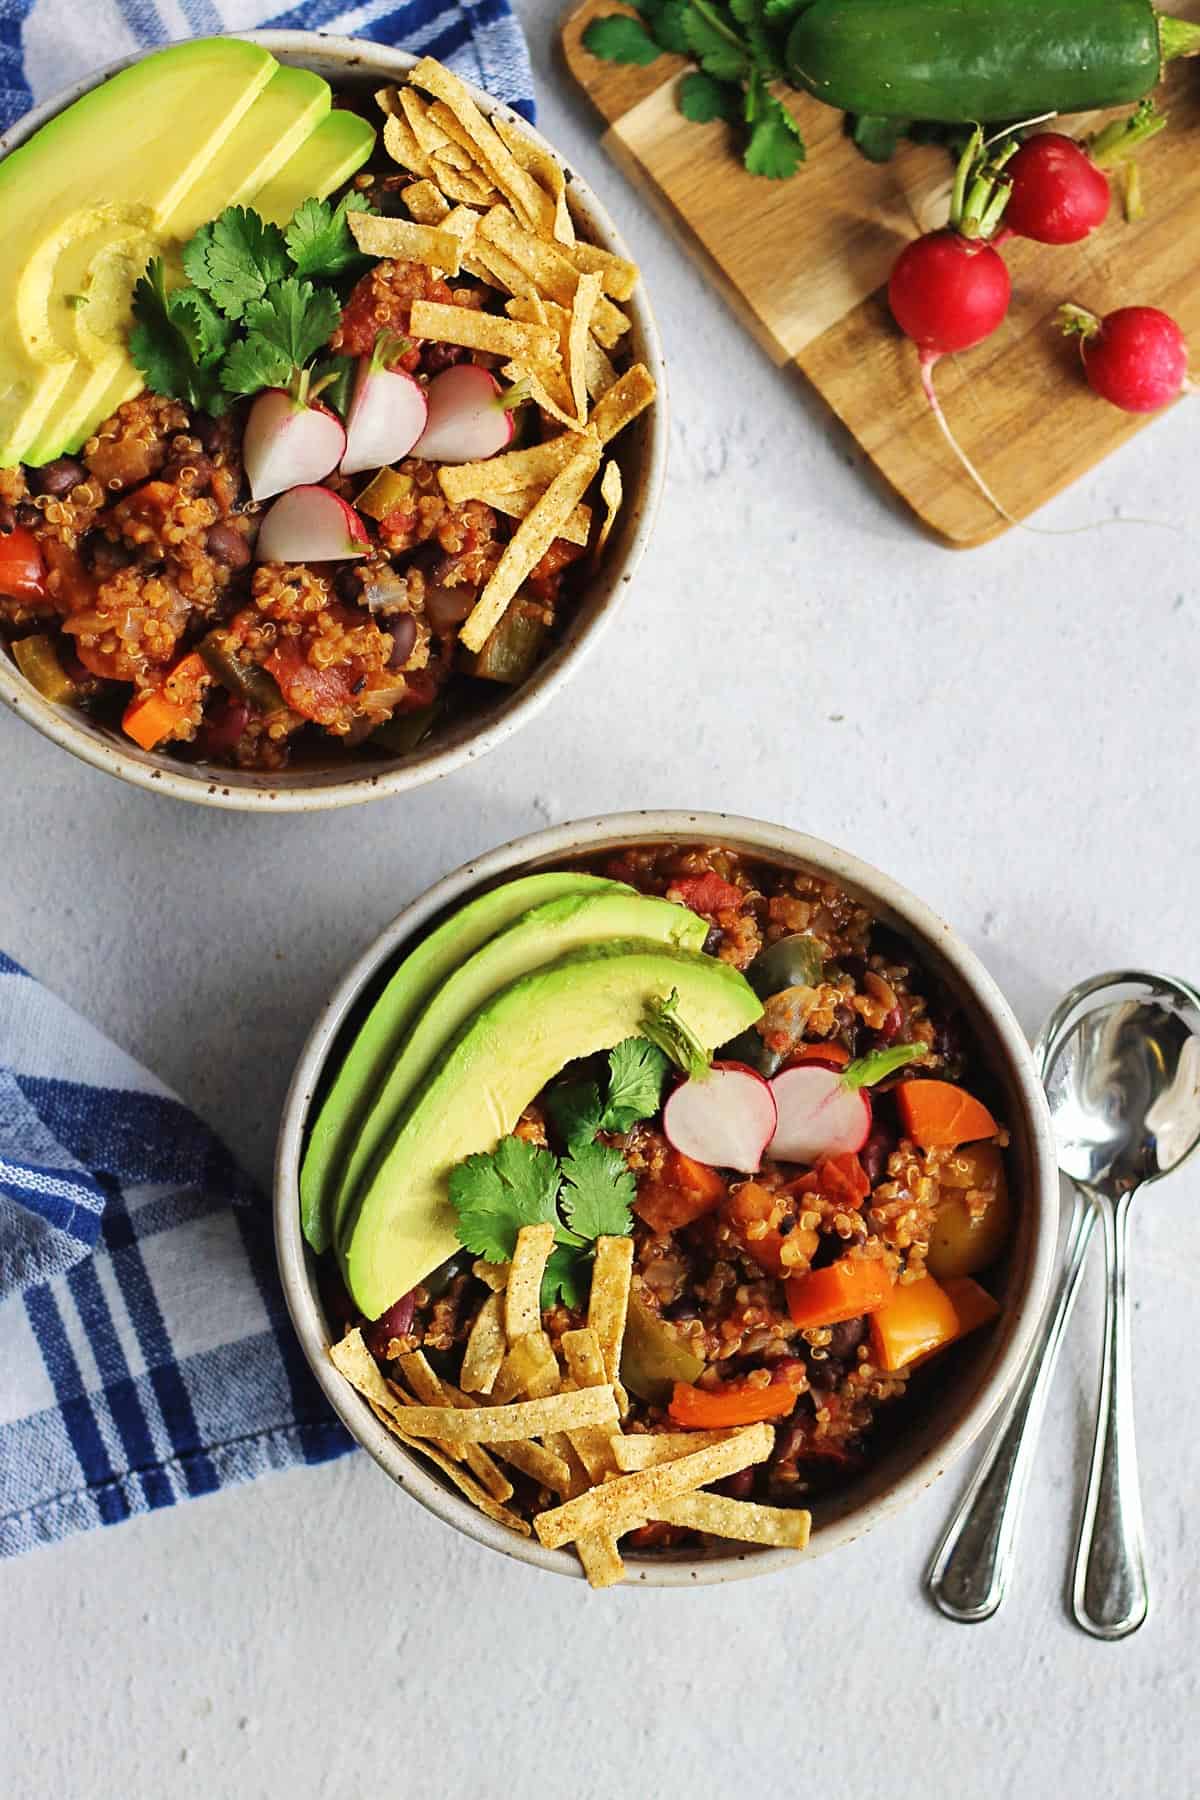 Black bean chili with avocado and tortilla strips